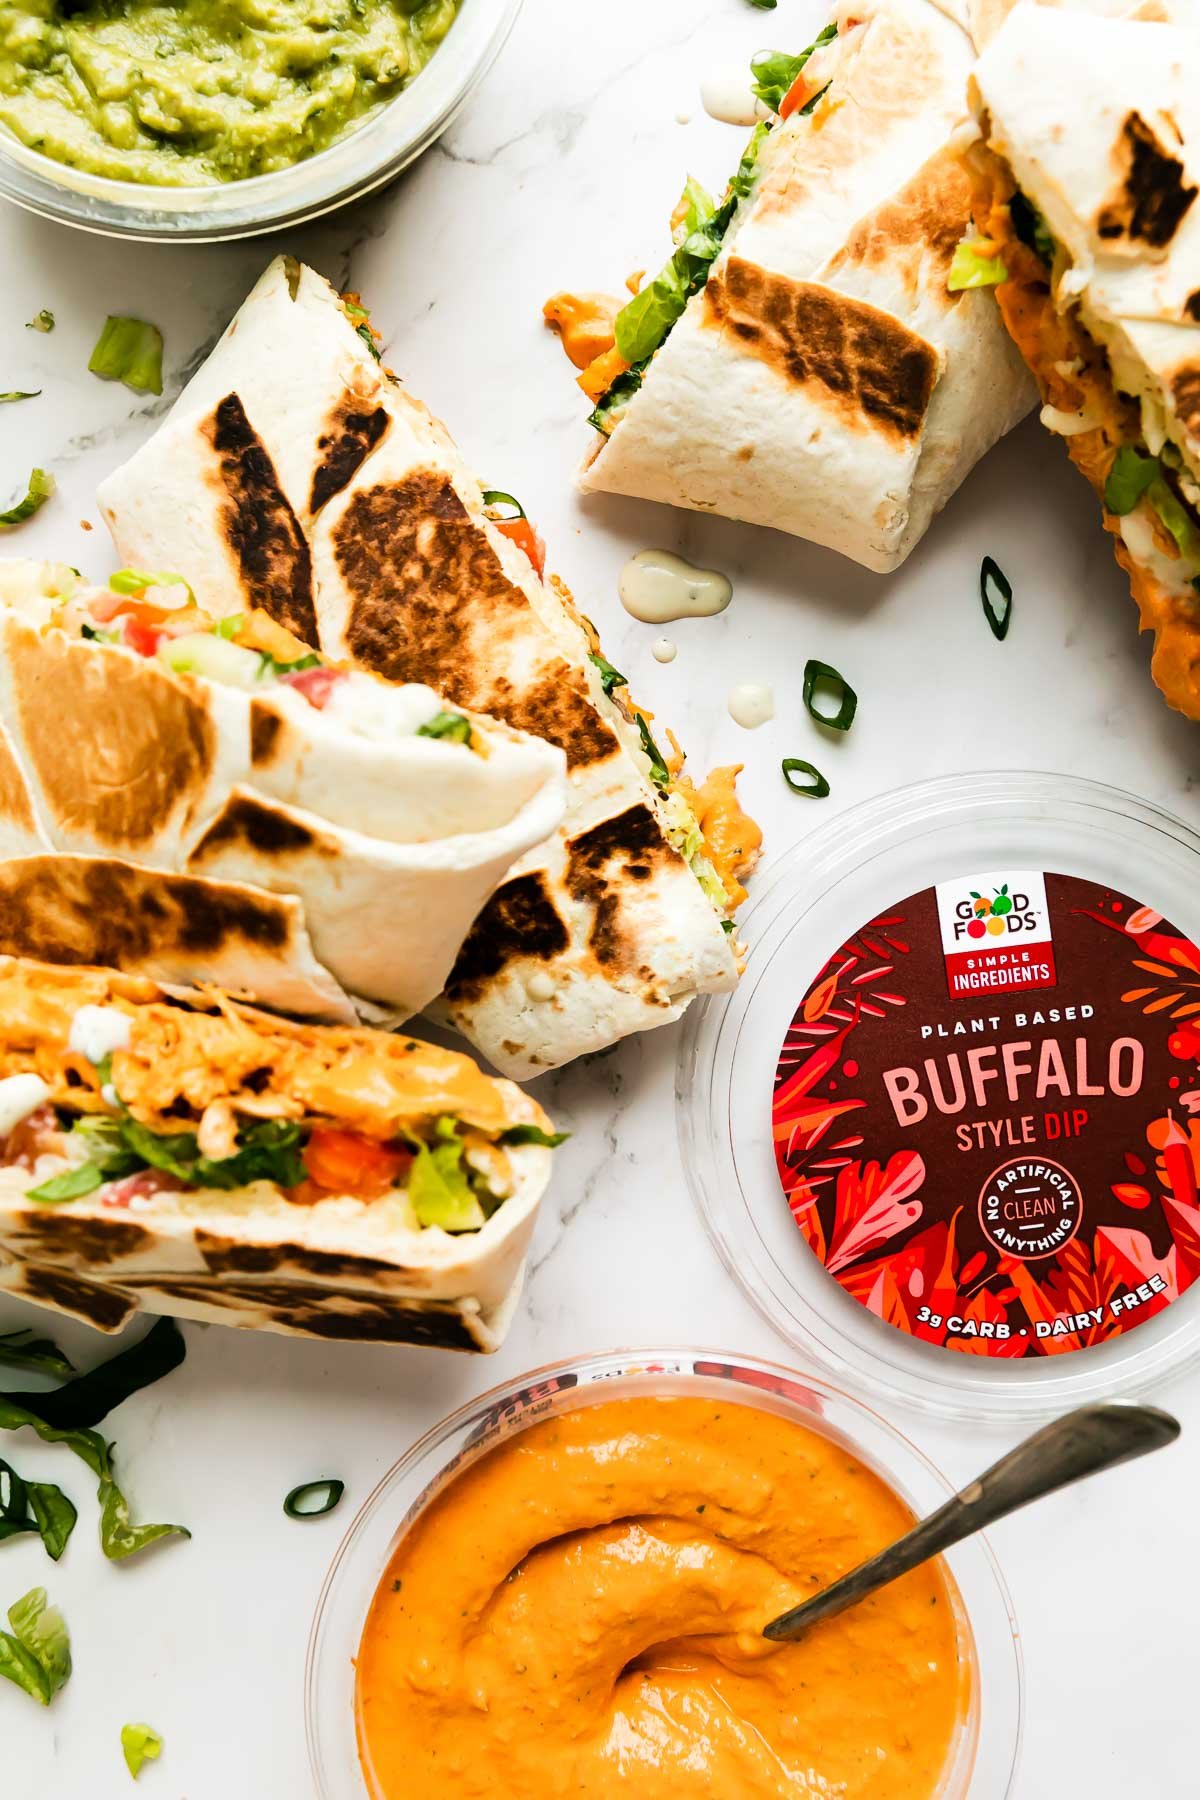 Five buffalo chicken crunch wraps are arranged atop a white and gray marble surface. An open container of Good Foods Plant Based Buffalo Dip and a second open container of Good Foods Chunky Guacamole rest alongside the crunchwraps. A spoon rests inside of the Good Foods Plant Based Buffalo Dip.